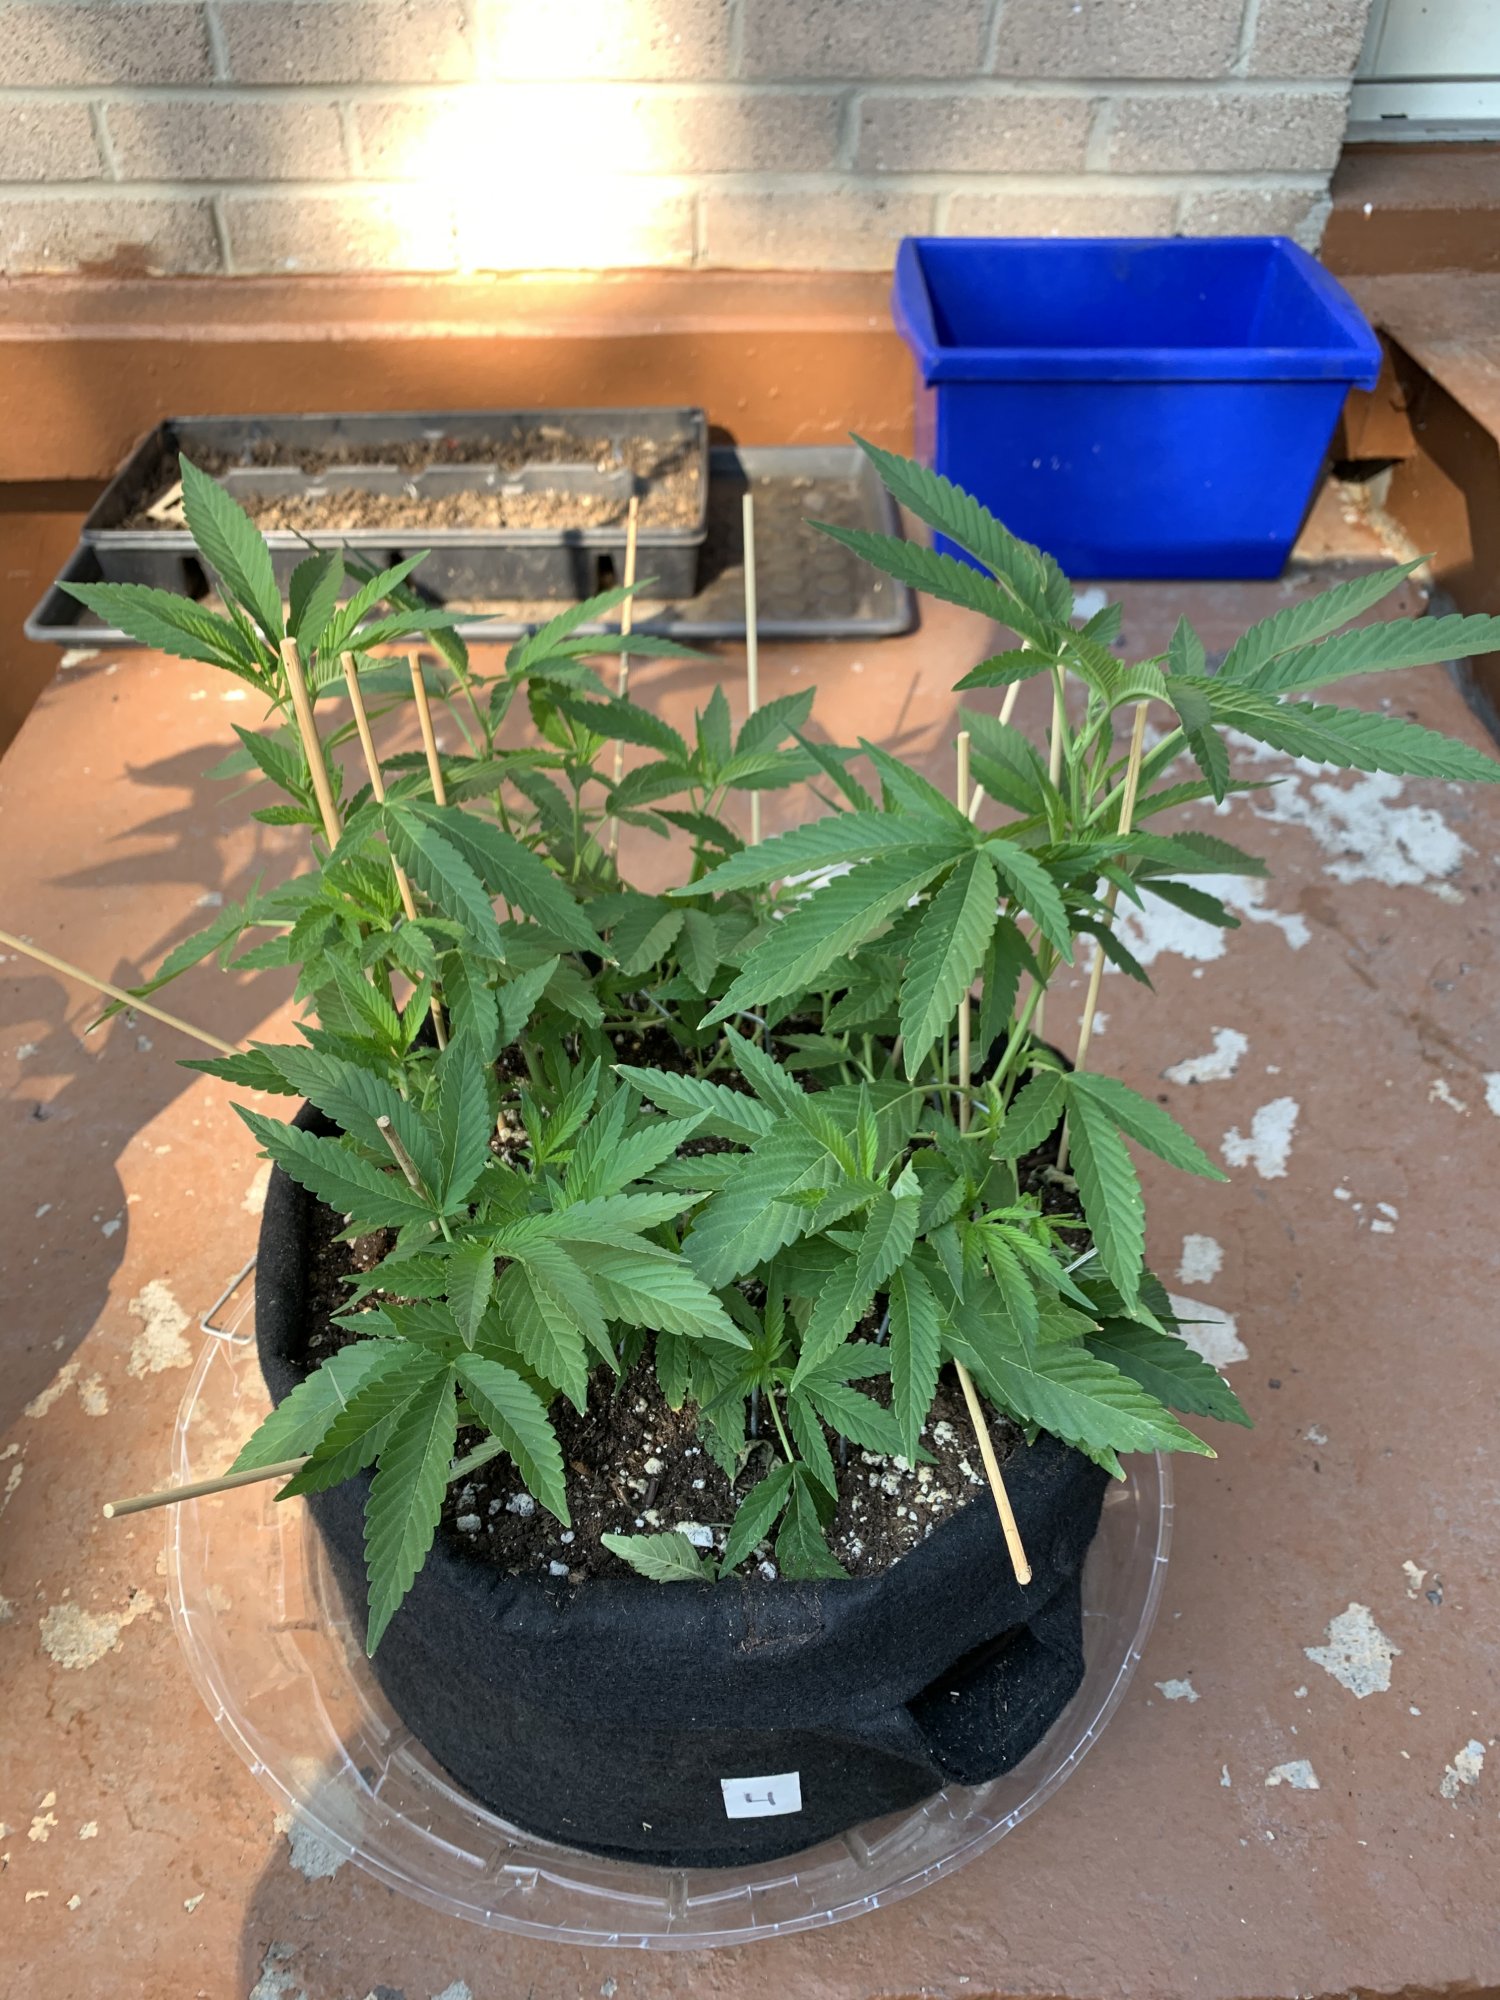 New grower looking for advice on my pink kush clones 3